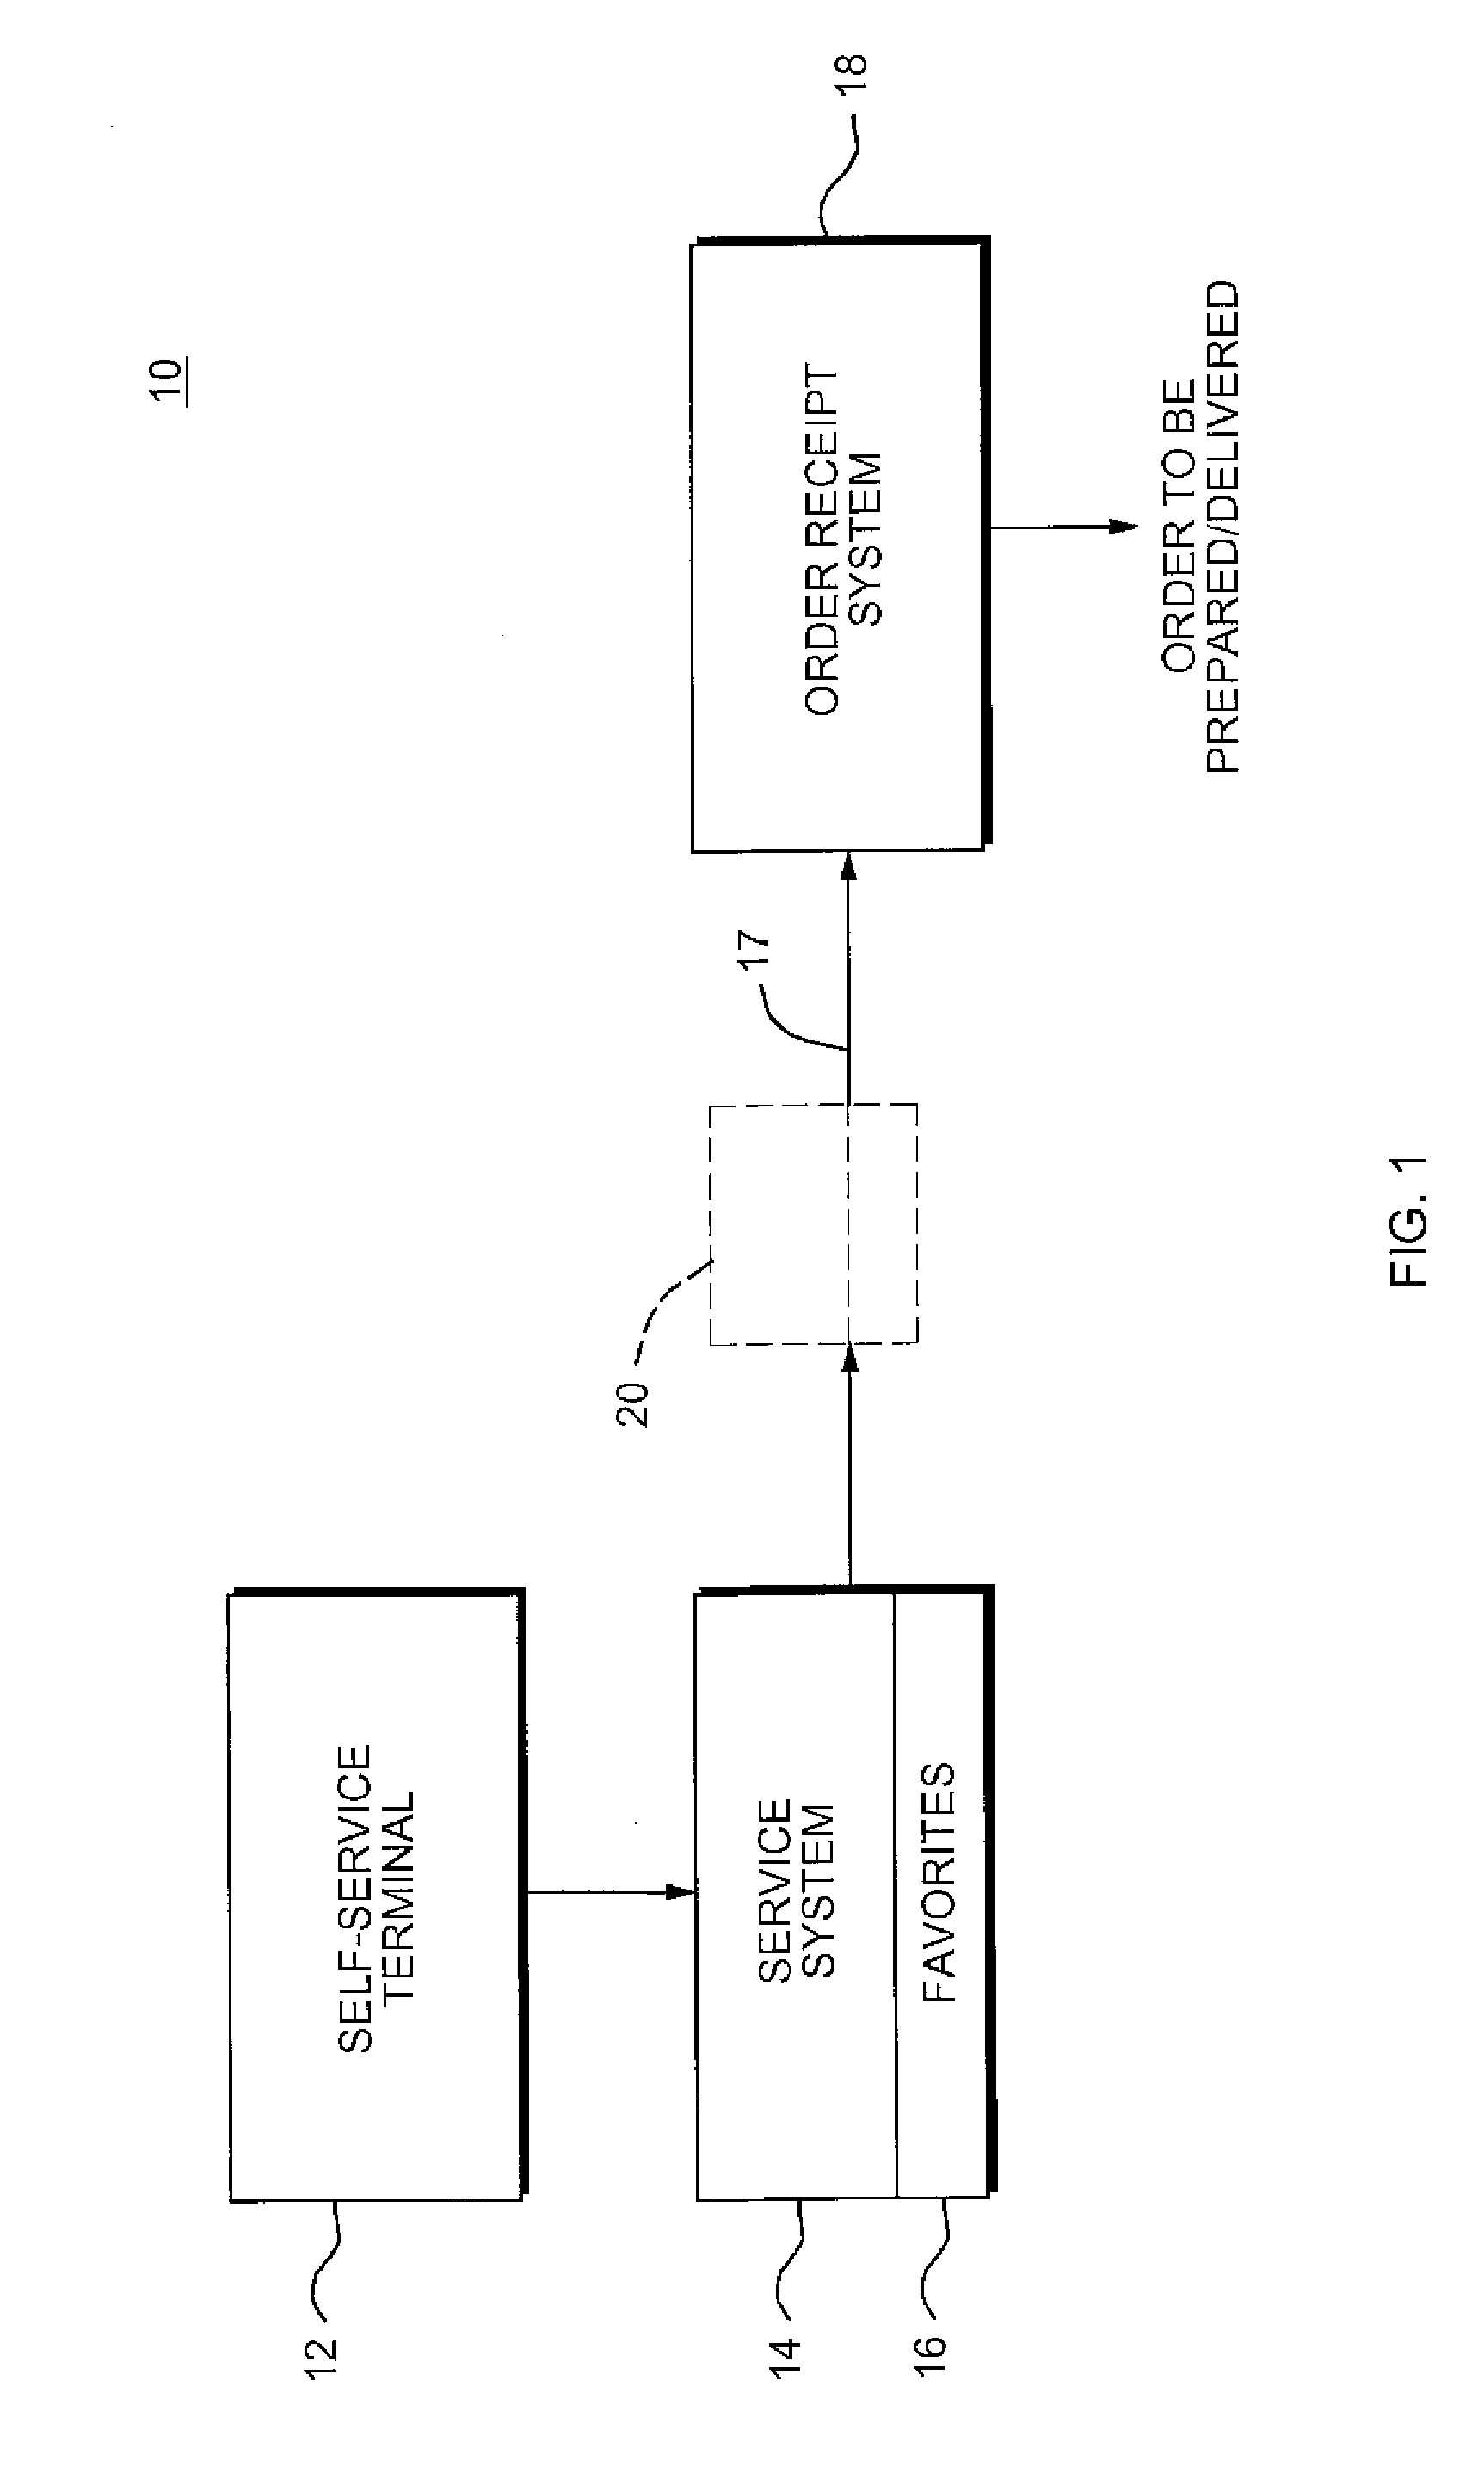 Self-serve ordering system and method with consumer favorites